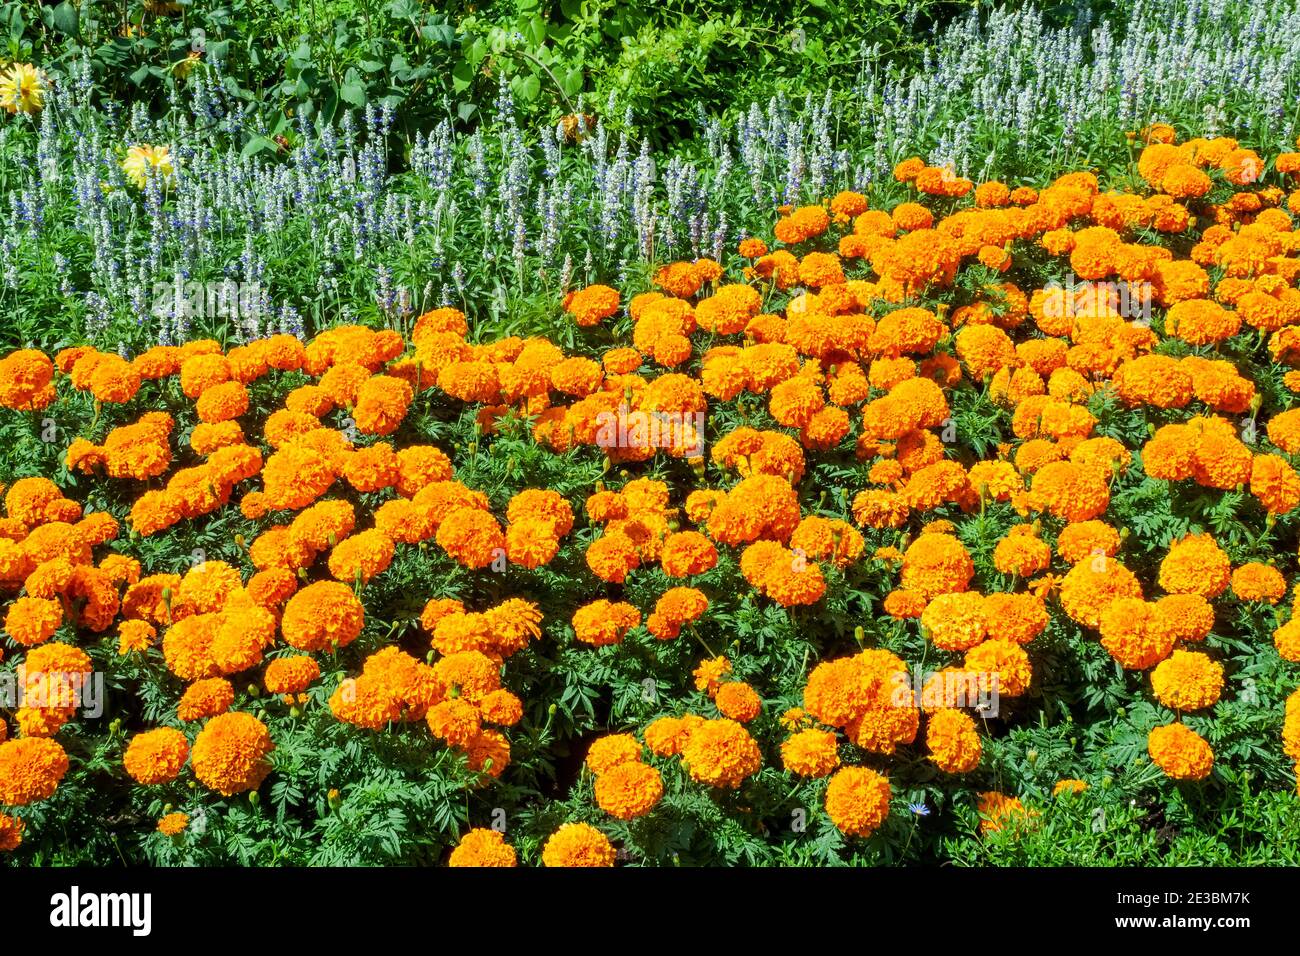 Flower bed border of marigolds which are a yellow summer flowering plant growing in a public park formal garden in July, stock photo image Stock Photo